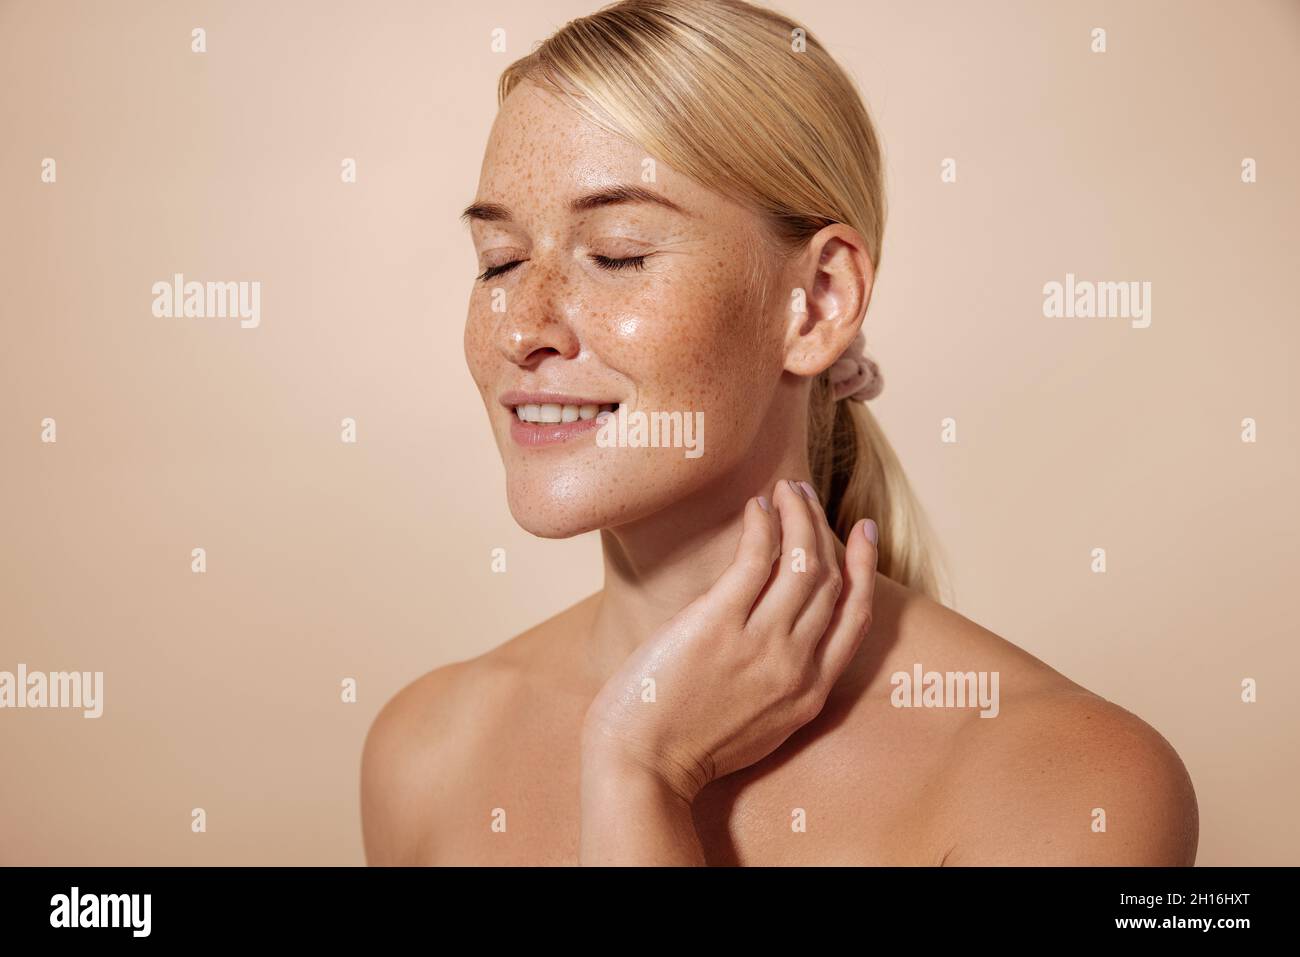 Smiling woman with freckles and perfect skin massaging her neck against pastel background Stock Photo